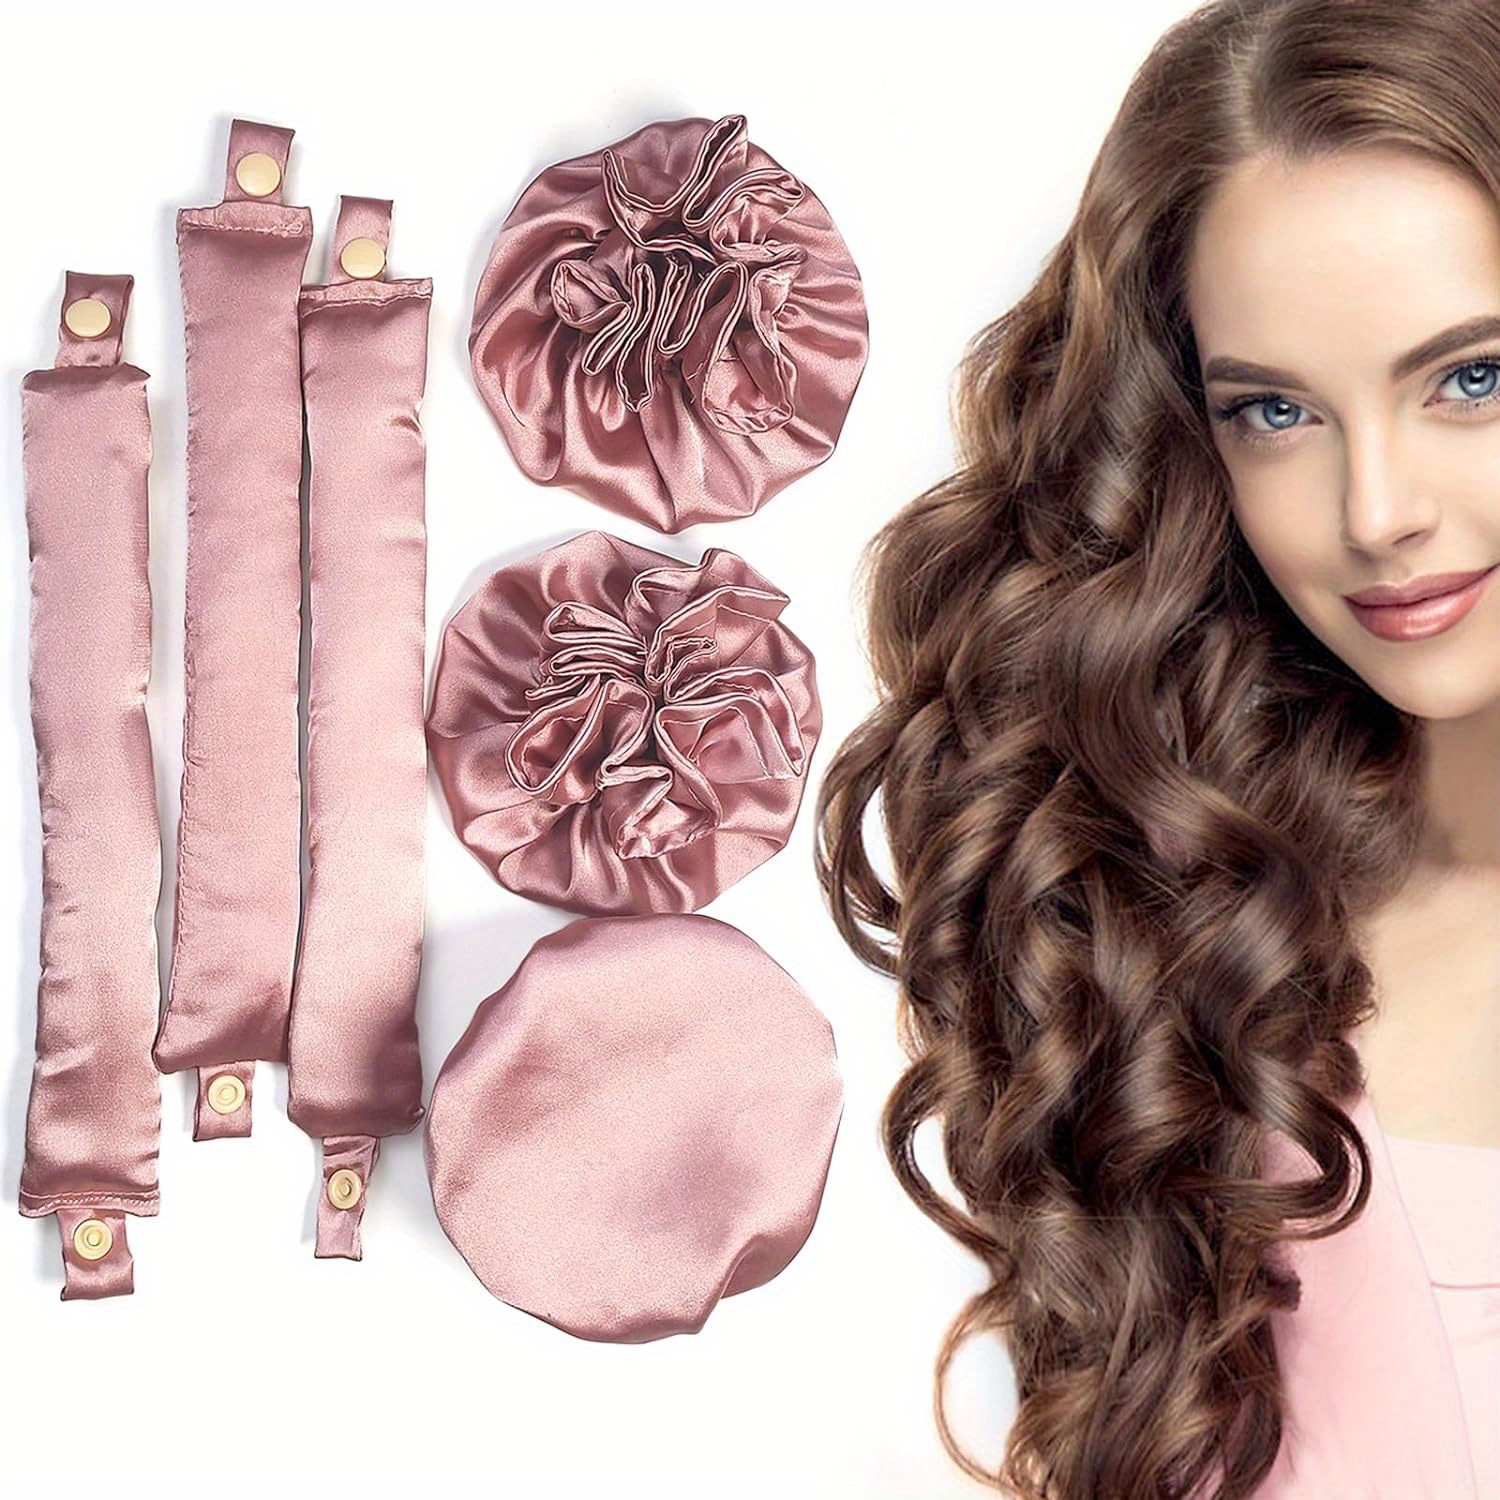 

Satin Heatless Hair Curler 3sets/6pcs, Pillow Soft Rollers With Hair Caps, Soft Heatless Curling Rod Headband For All Hair Types, No Heat Curlers To Sleep In